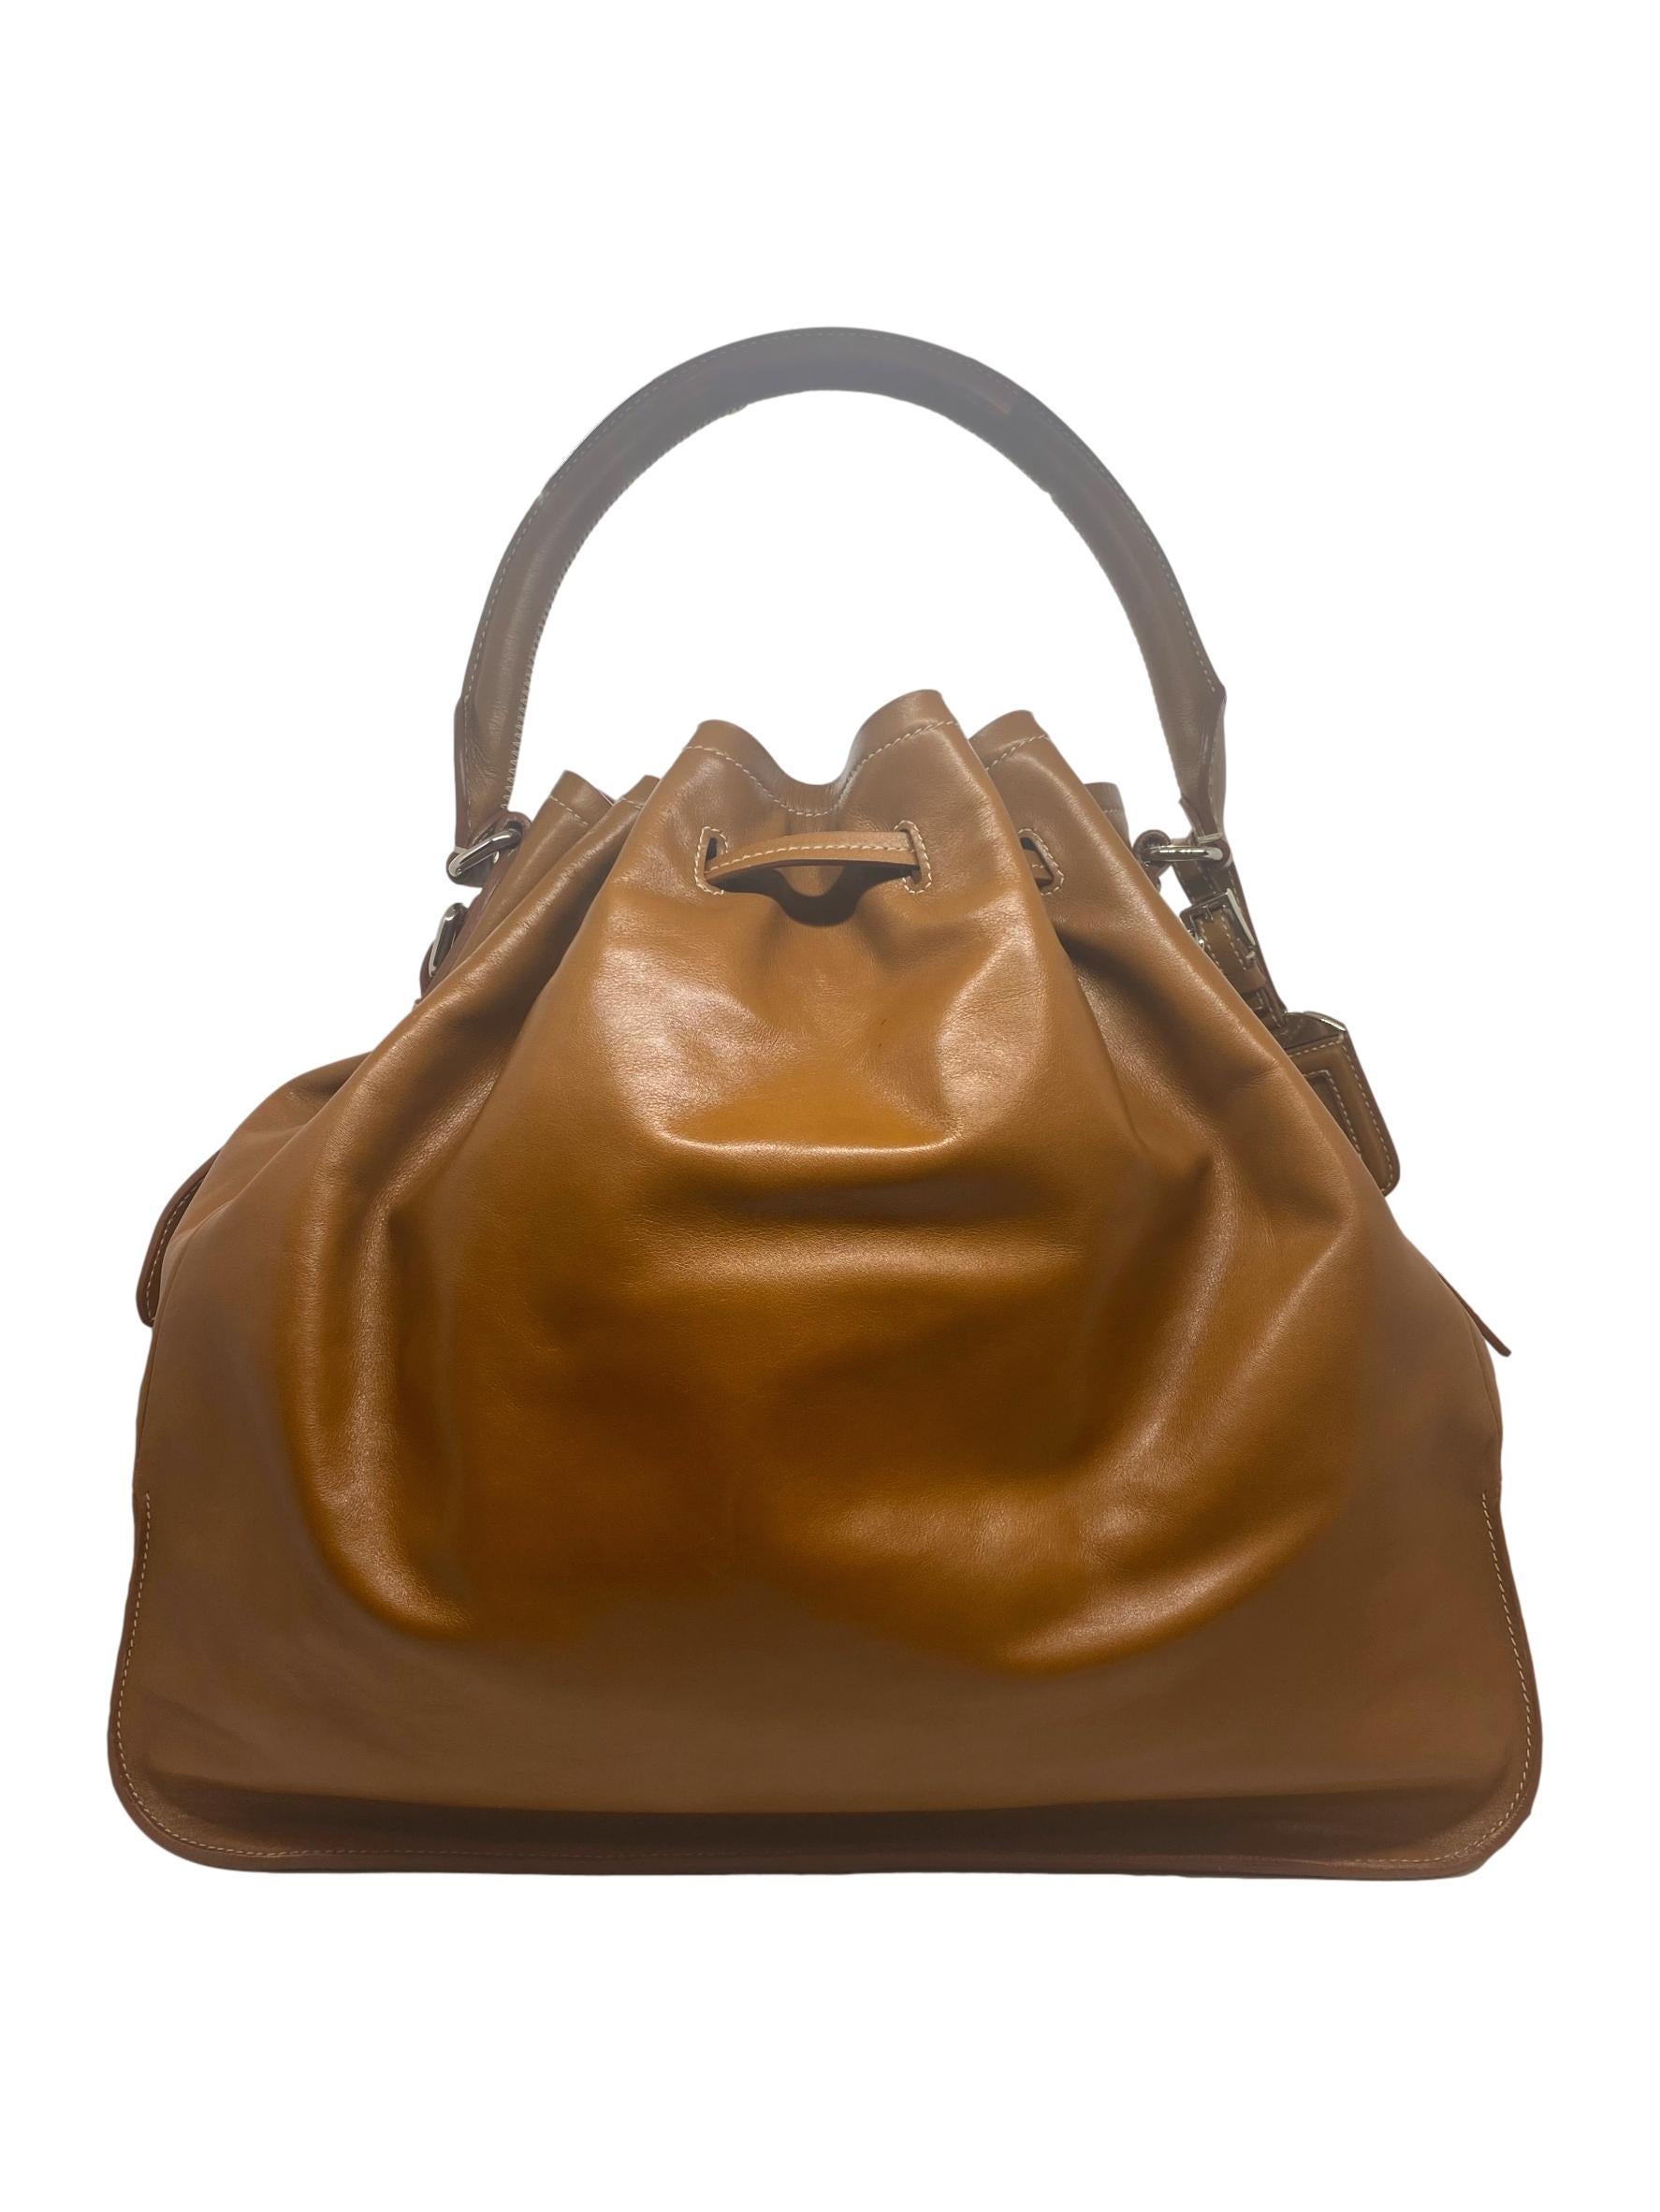 Prada Nappa Leather Drawstring Shoulder Top Handle Handbag, 2010. Founded by Mario Prada in 1913, Prada's flagship location opened in the Galleria Vittorio Emanuele II in Milan, the world's oldest shopping mall. By 1919, Prada officially became the